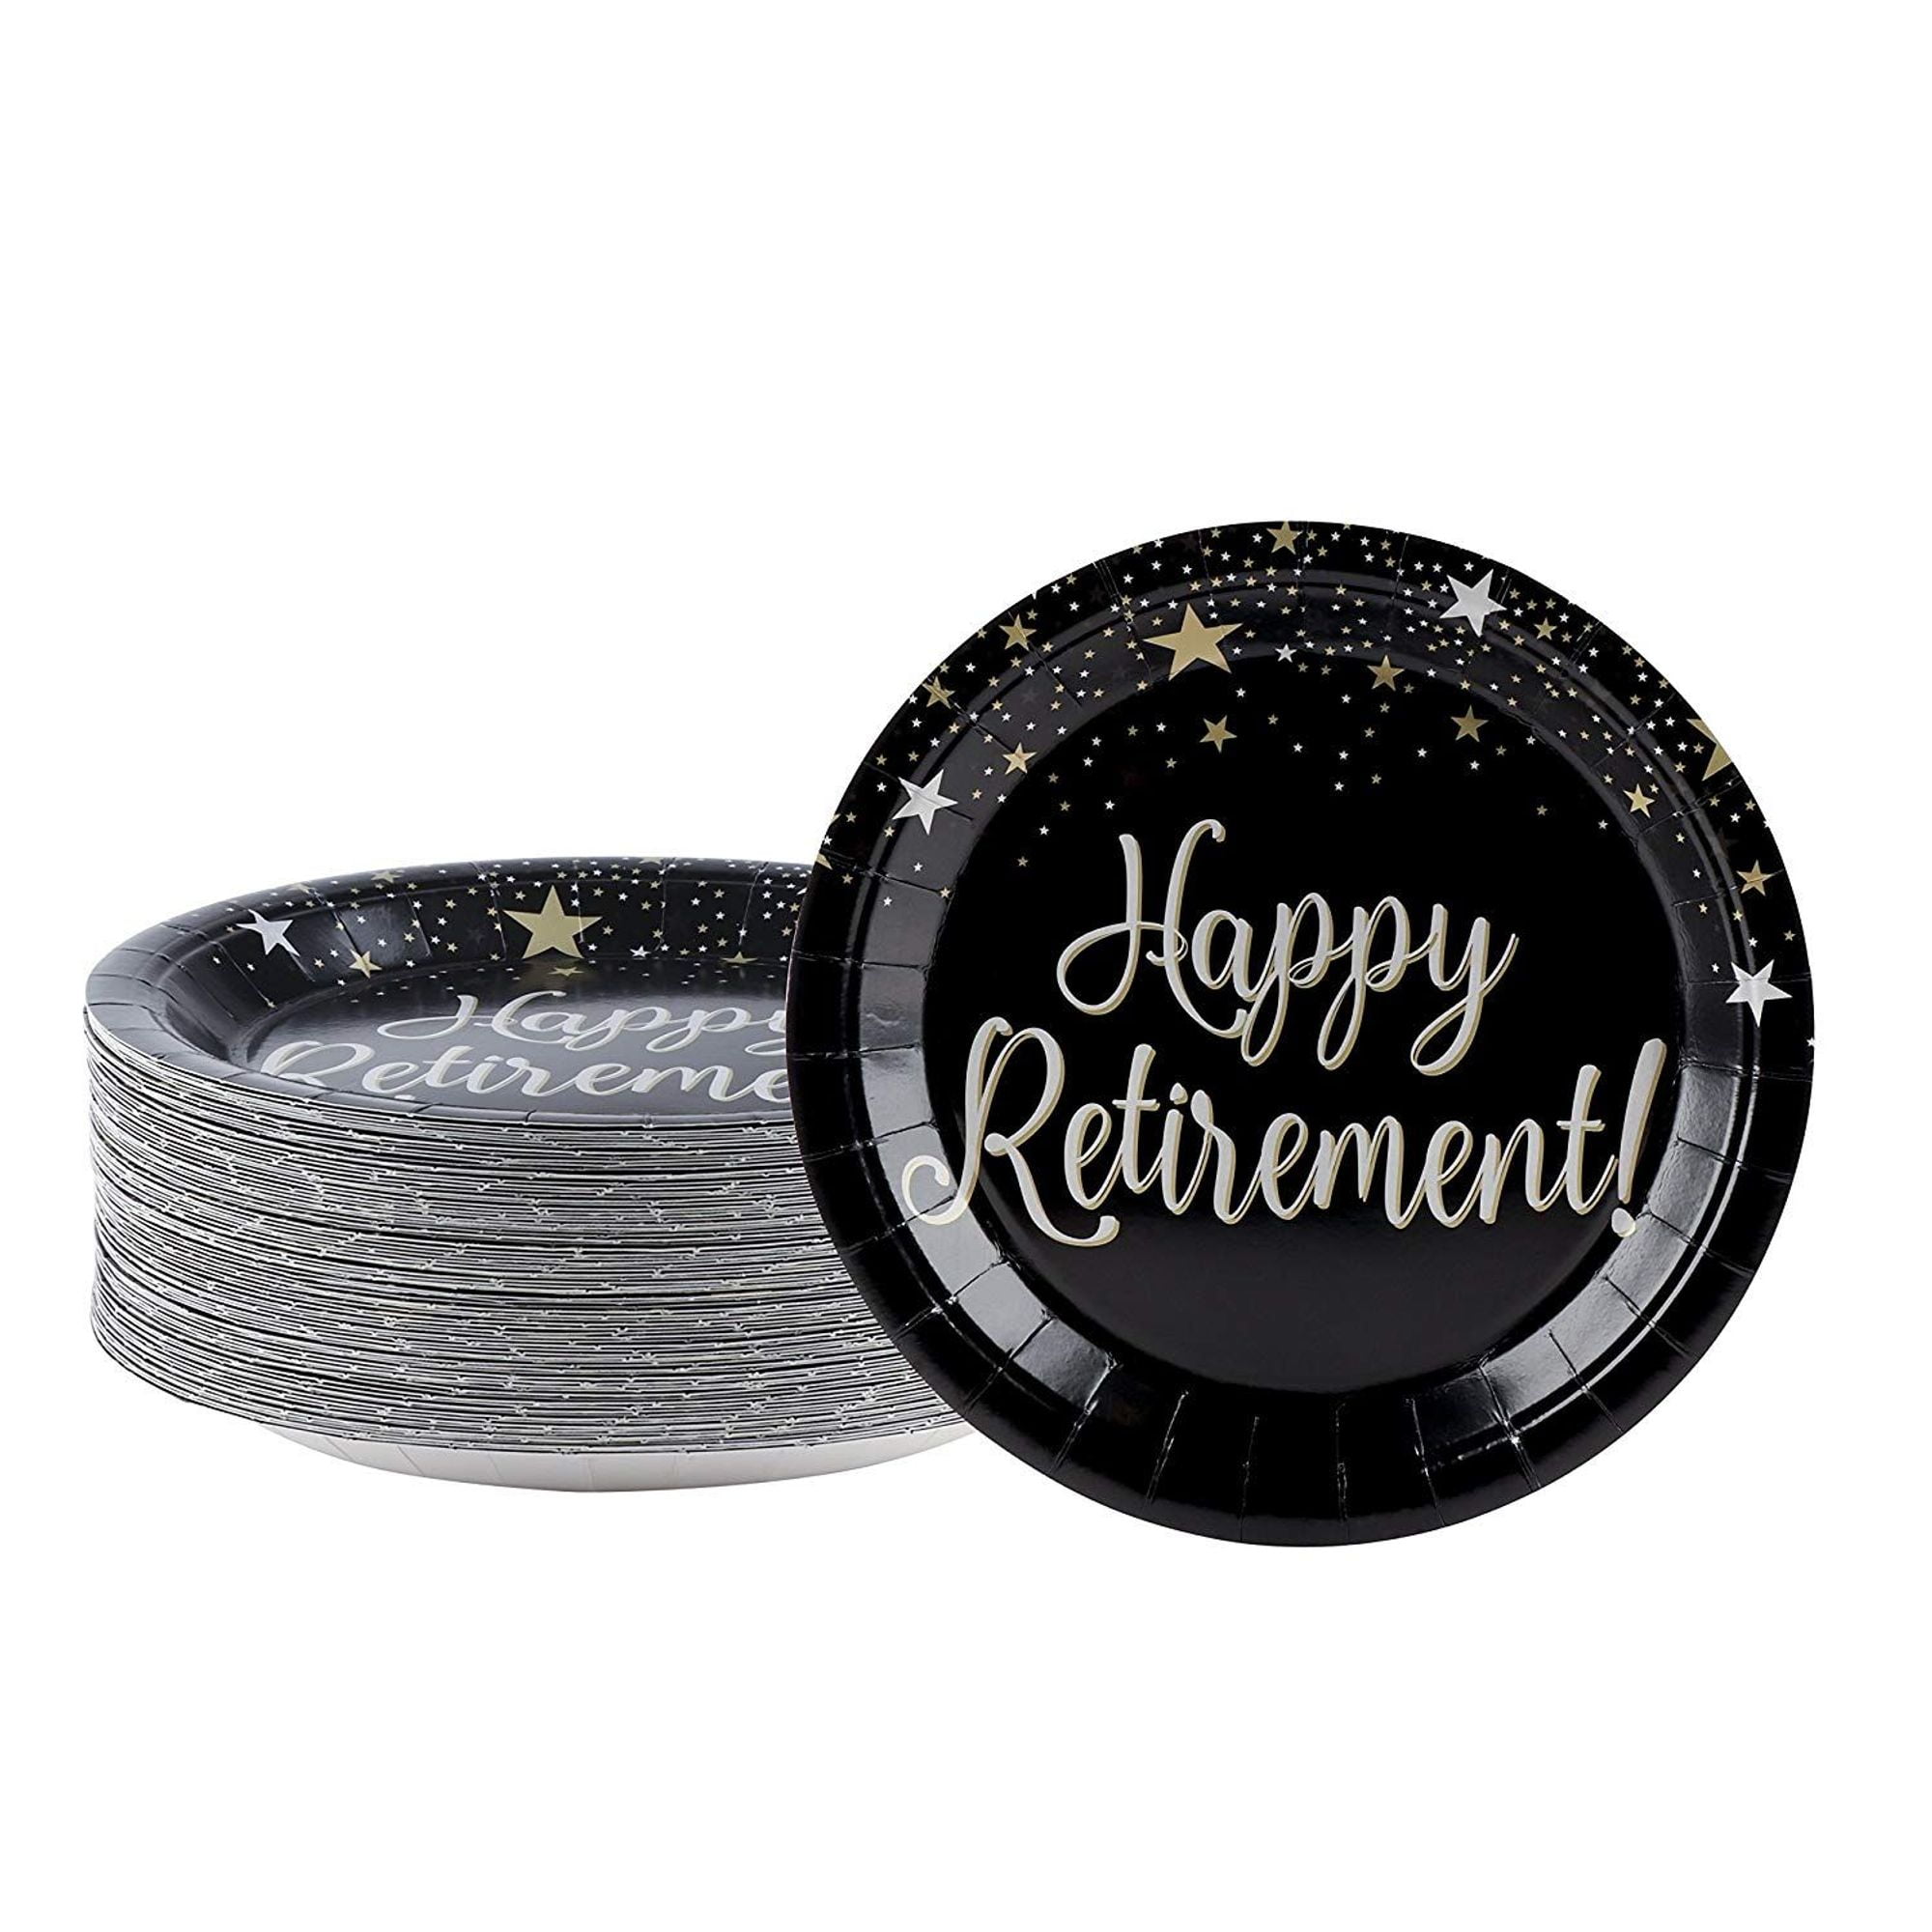 Disposable Plates - 80-Count Paper Plates, Happy Retirement Party Supplies for Appetizer, Lunch, Dinner, and Dessert, 9 x 9 inches